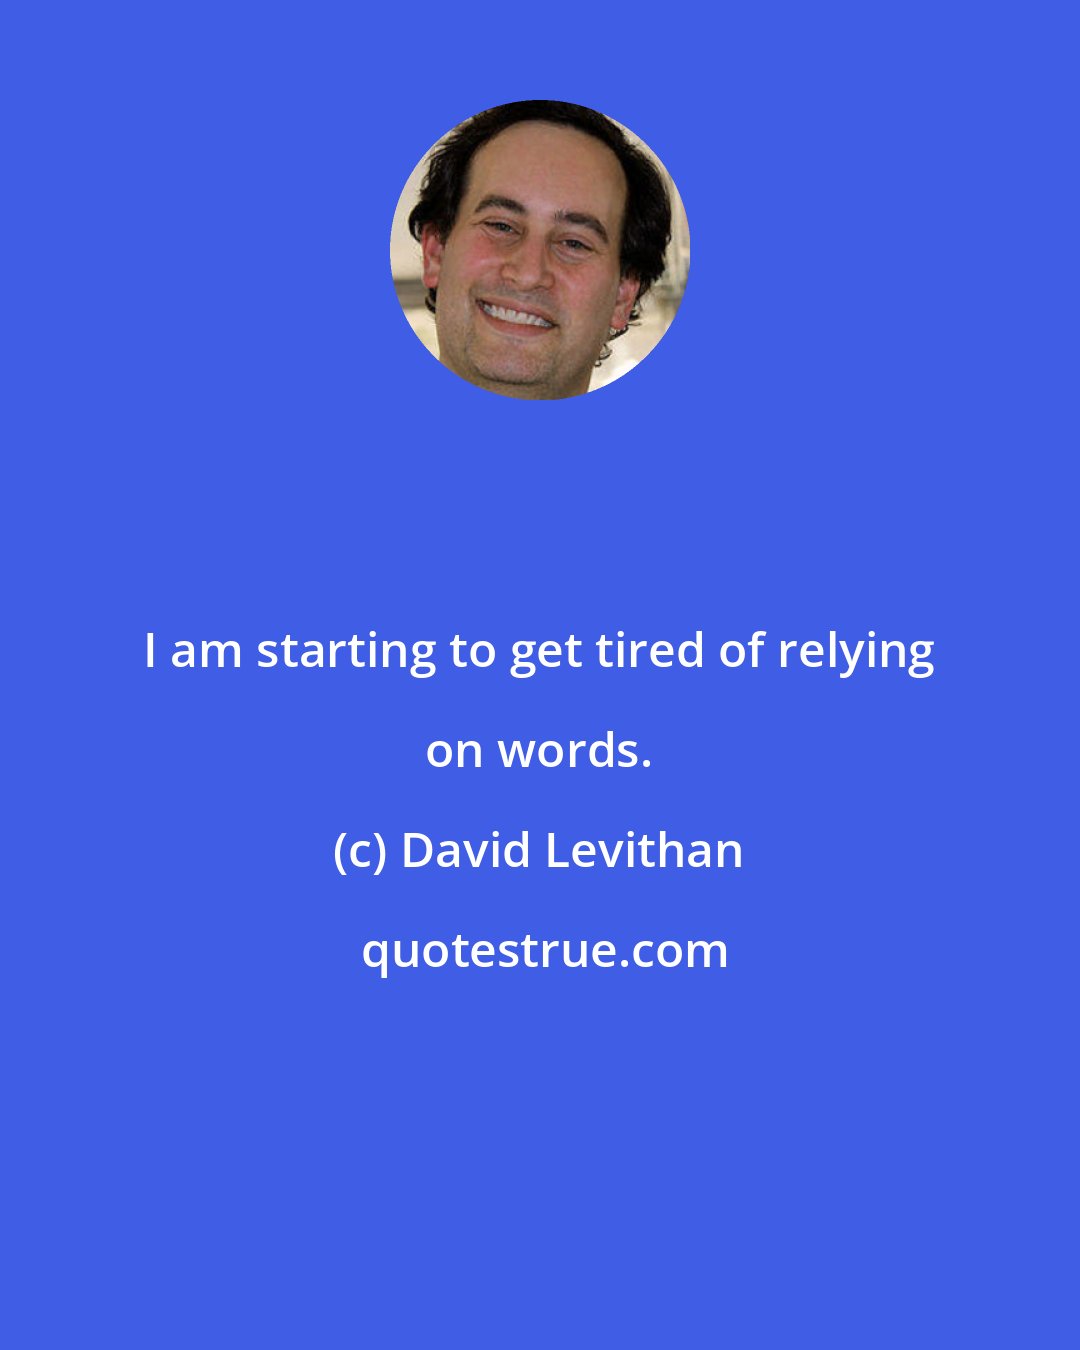 David Levithan: I am starting to get tired of relying on words.